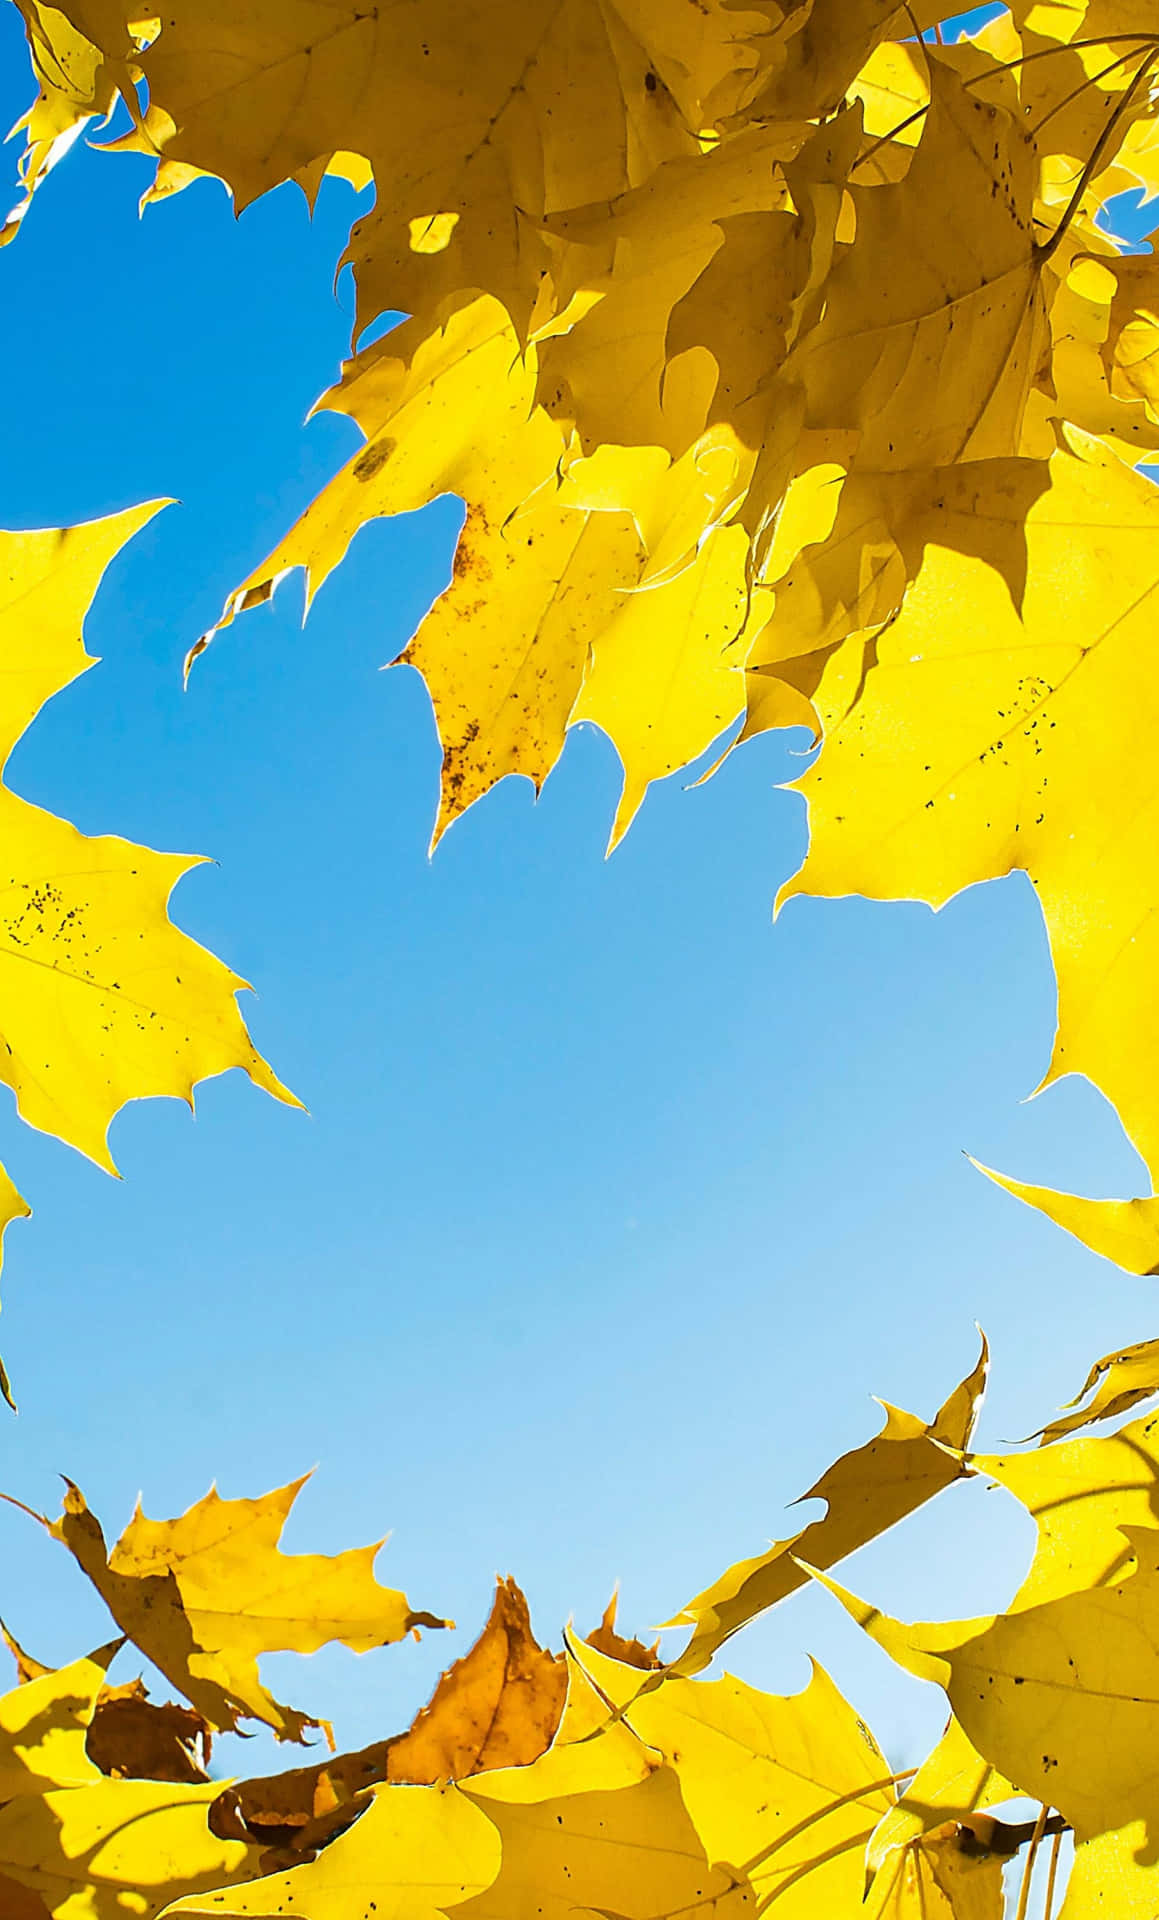 Autumn Yellow Leaves on a Branch Wallpaper